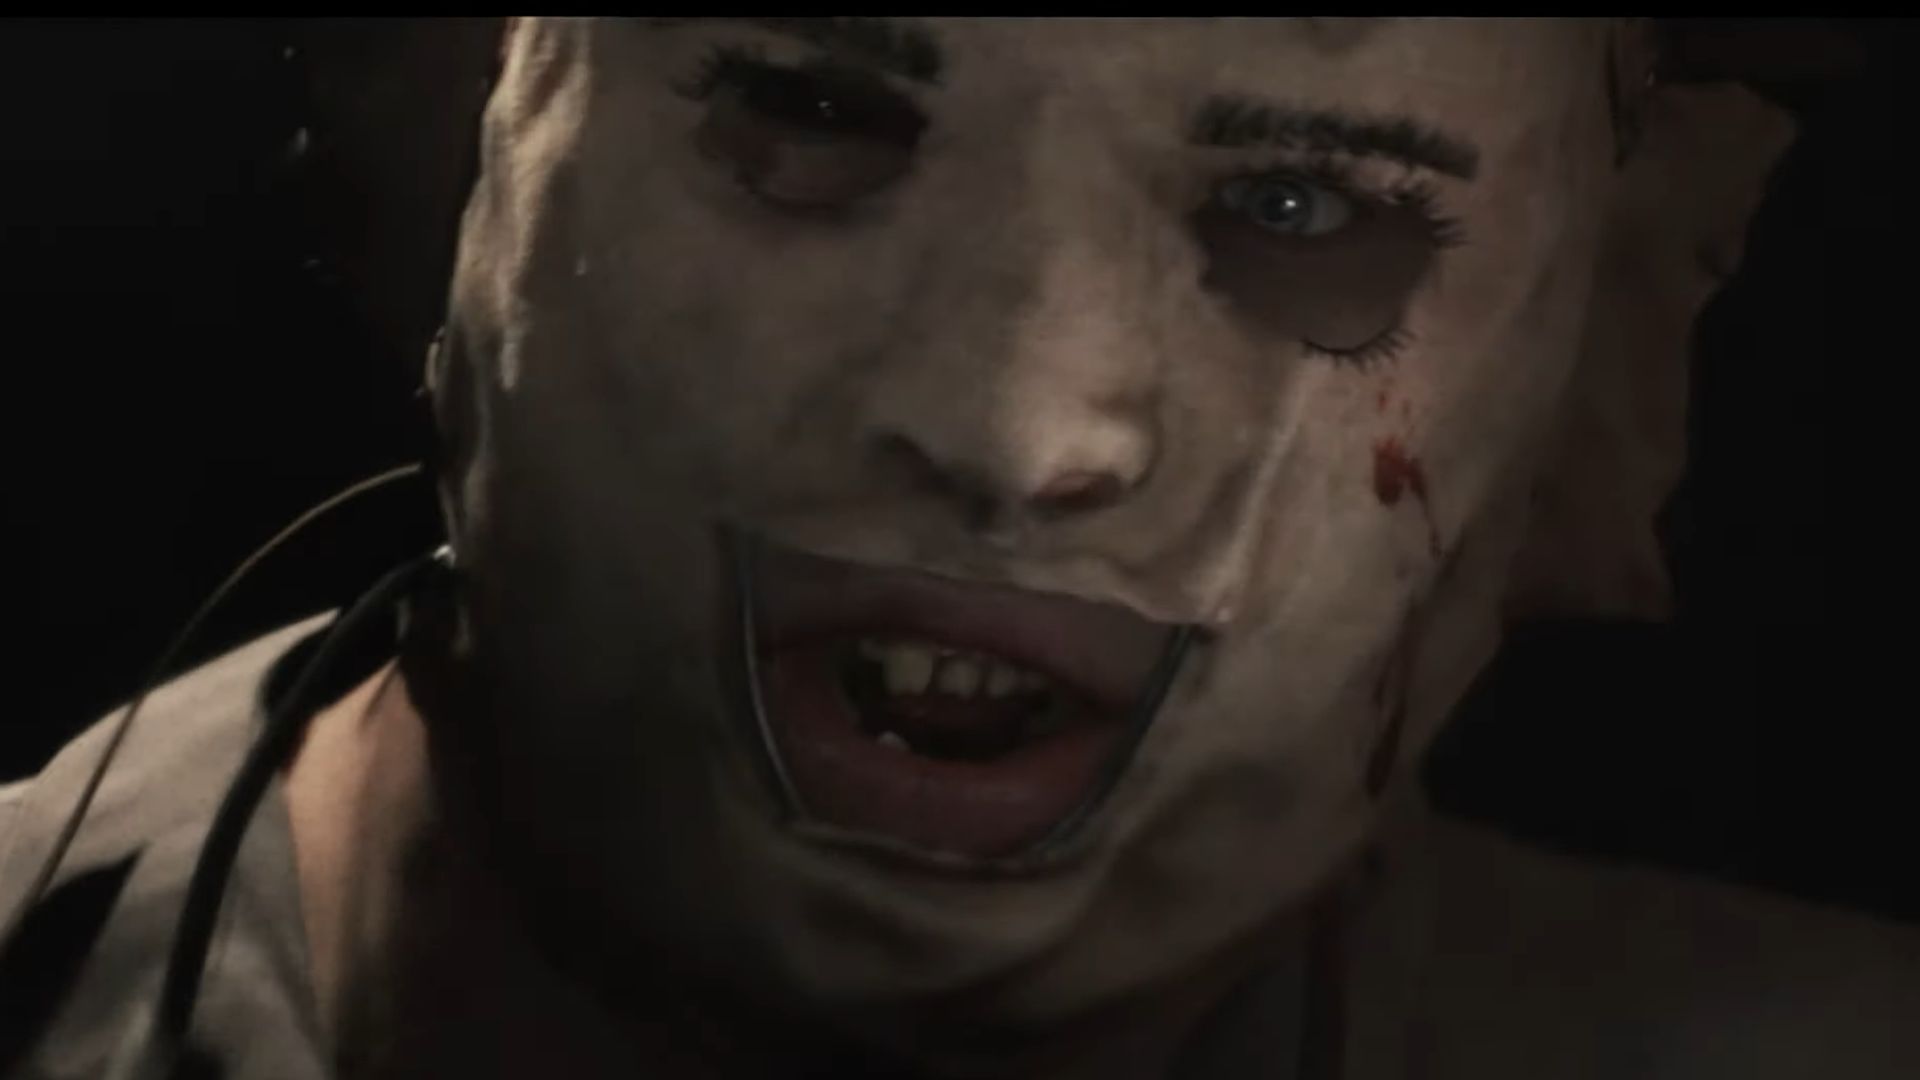 Check out how the Texas Chainsaw Massacre game perfectly recreates scenes from the movie thumbnail